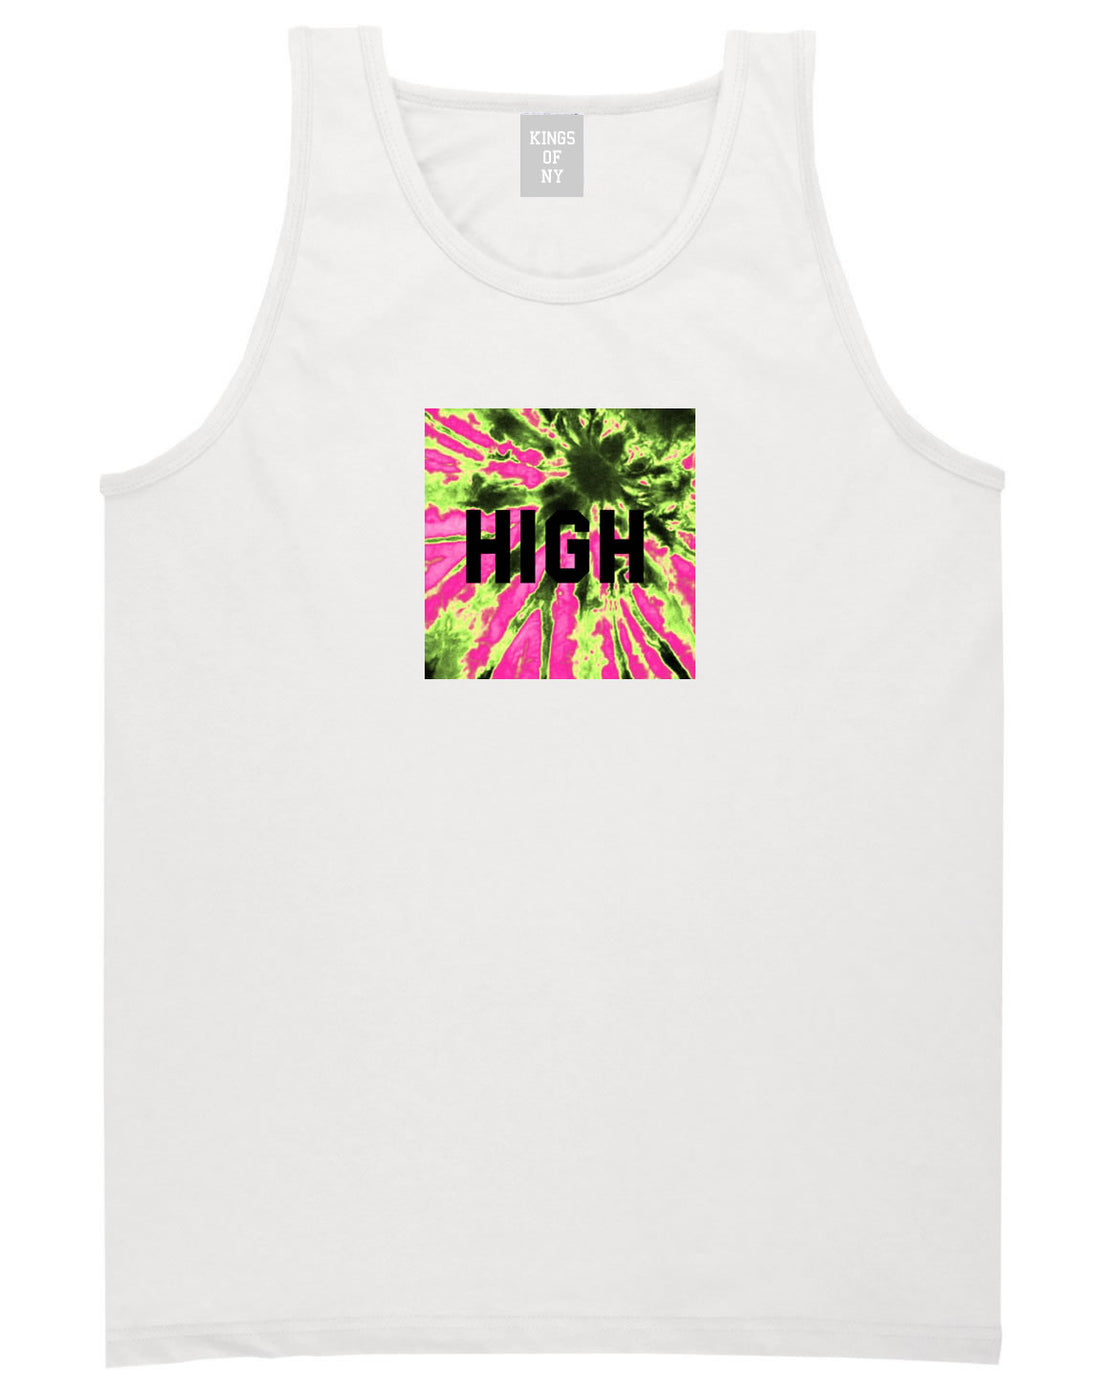 High Pink Tie Dye Tank Top in White By Kings Of NY